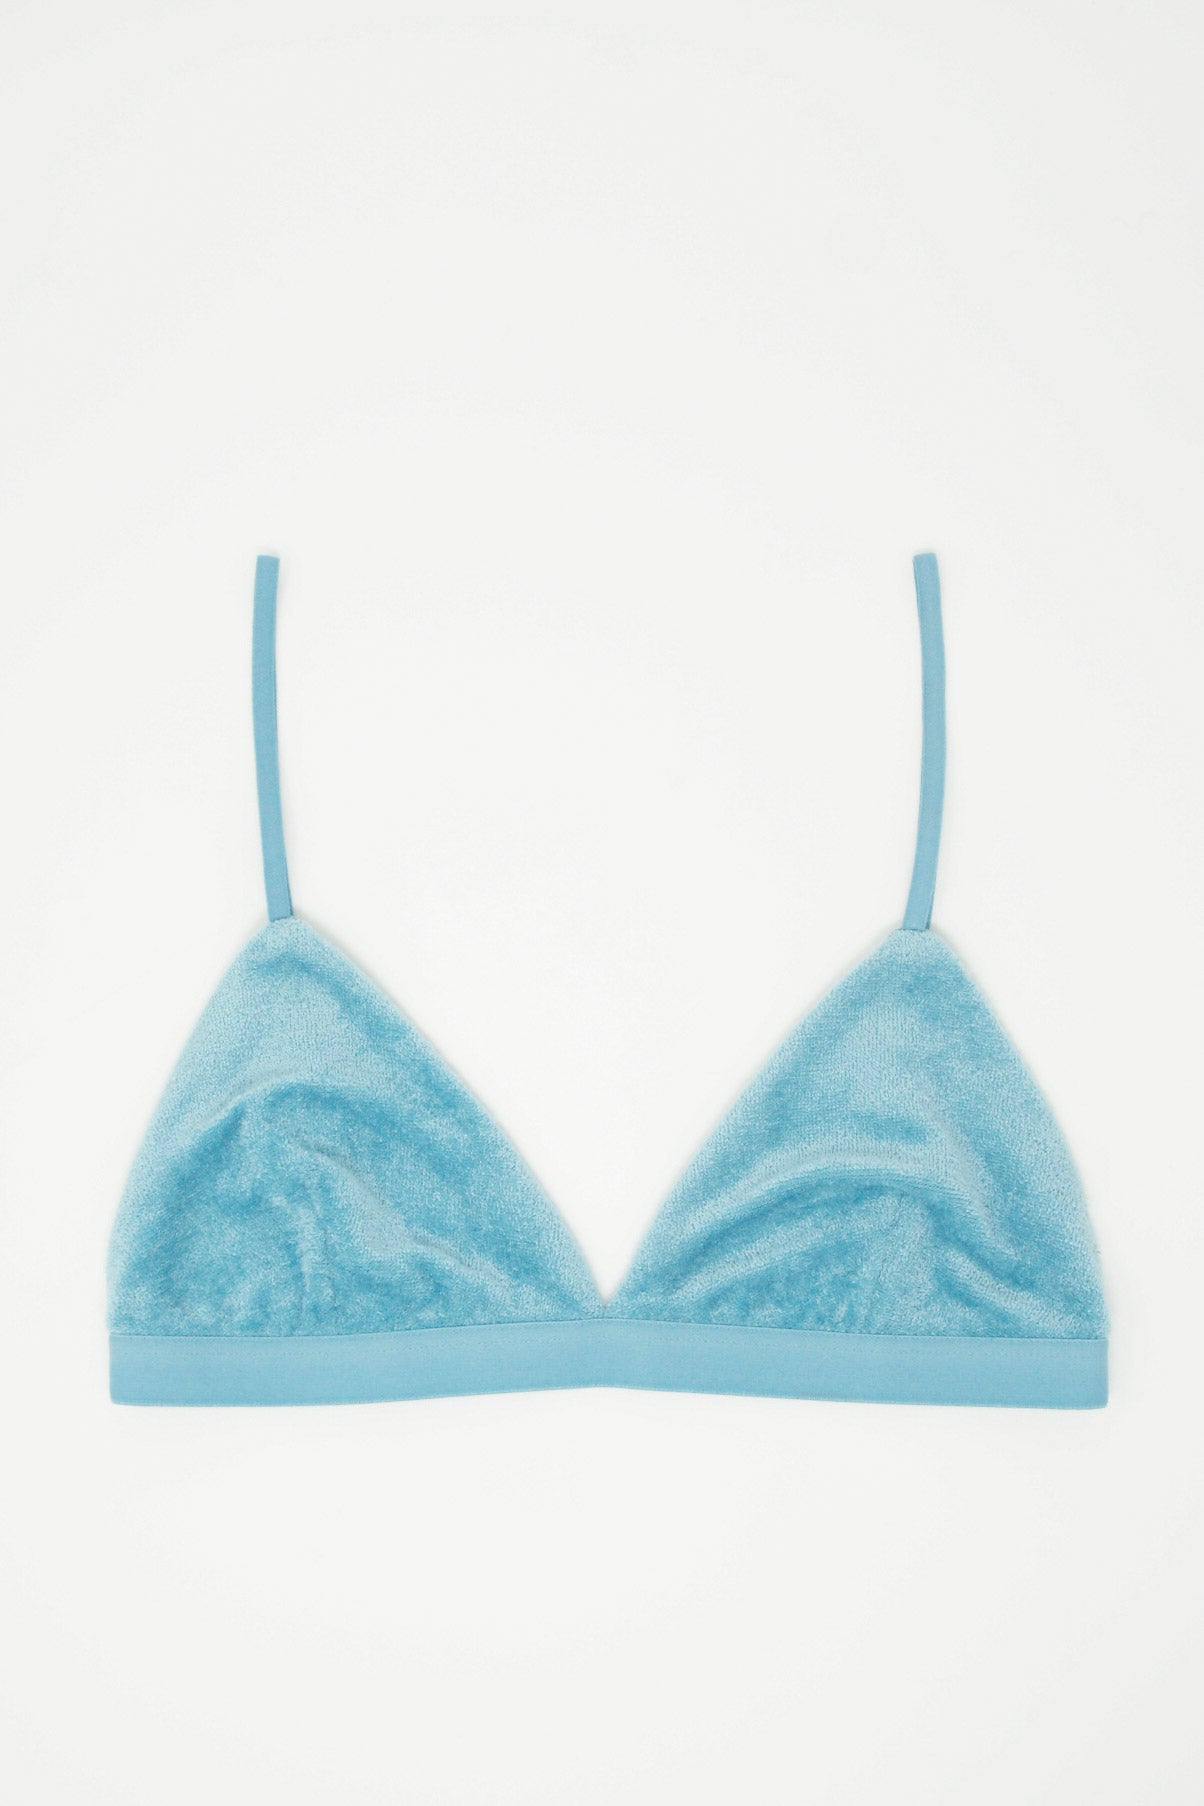 A timeless Mississippi Bra in Civi Blue with a sustainable furry lining by Baserange.